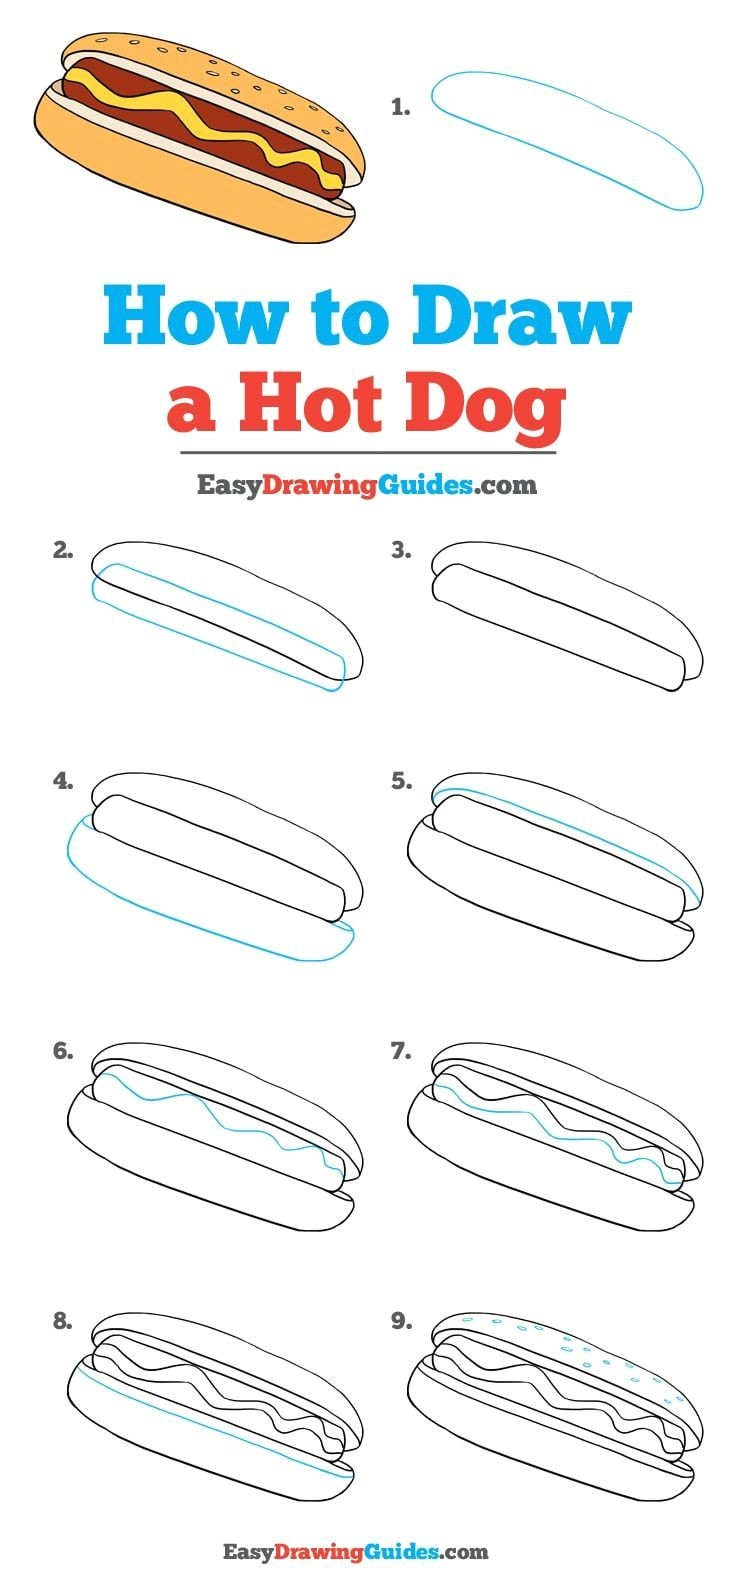 Easy Drawing Of A Hot Dog 207 Best Draw Food N Goodies S by S Images In 2019 Easy Drawings